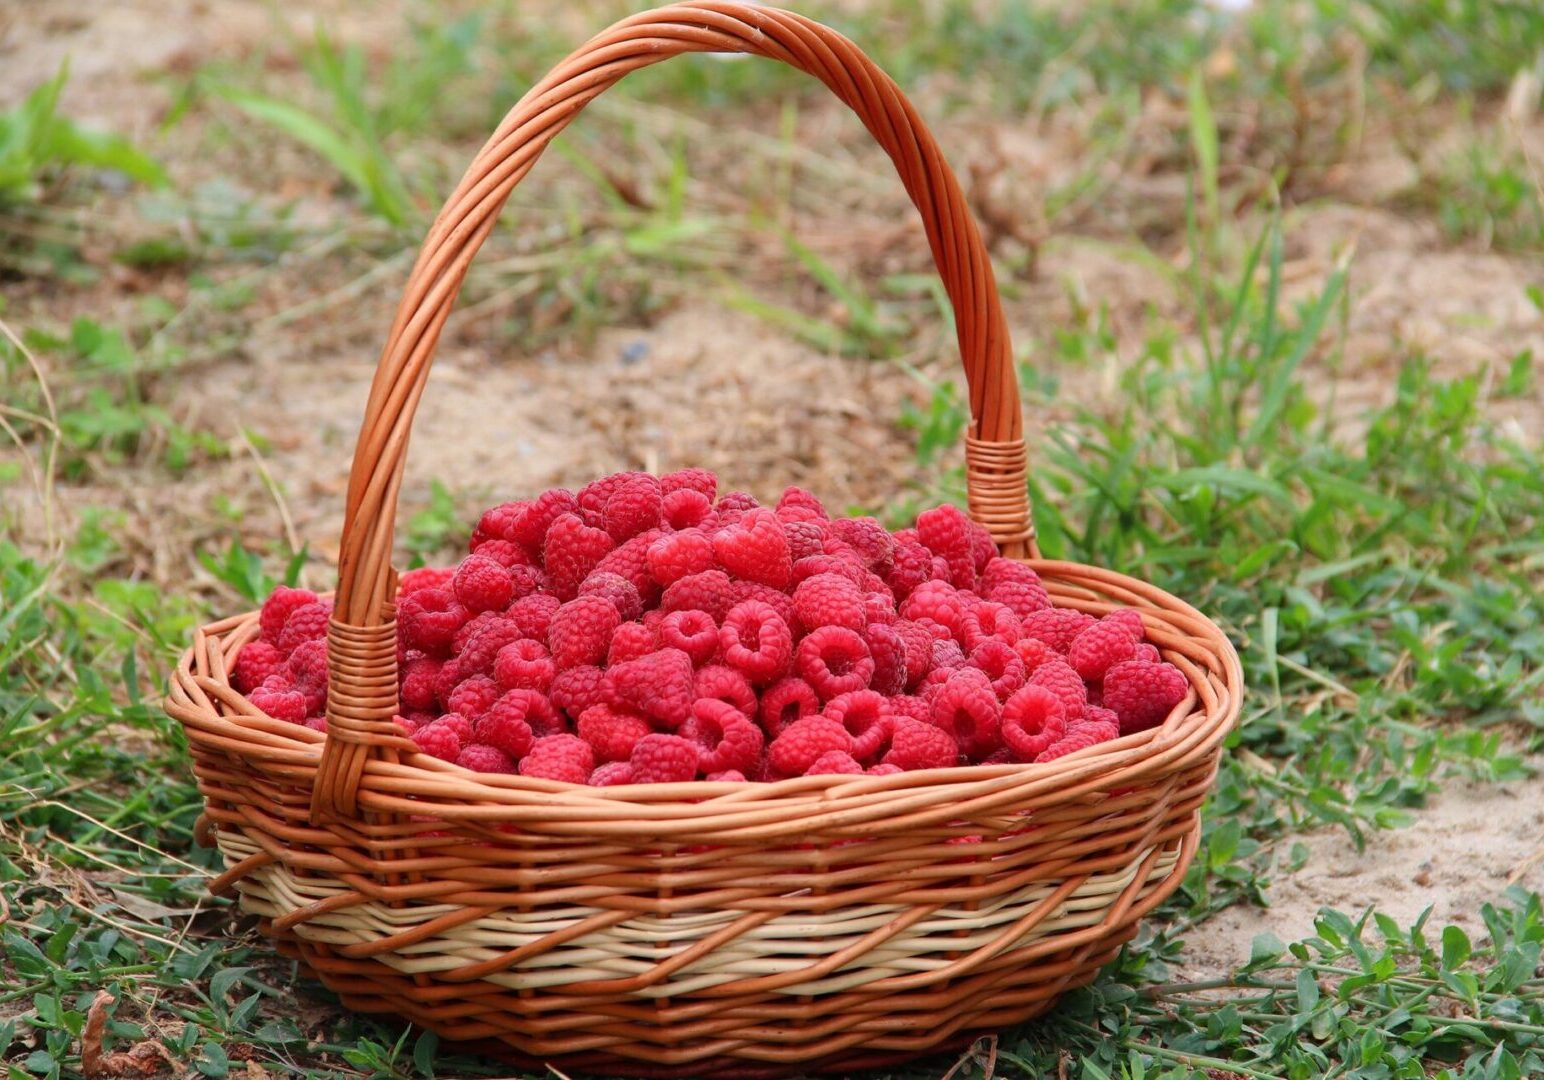 A basket of raspberries sitting on the ground.